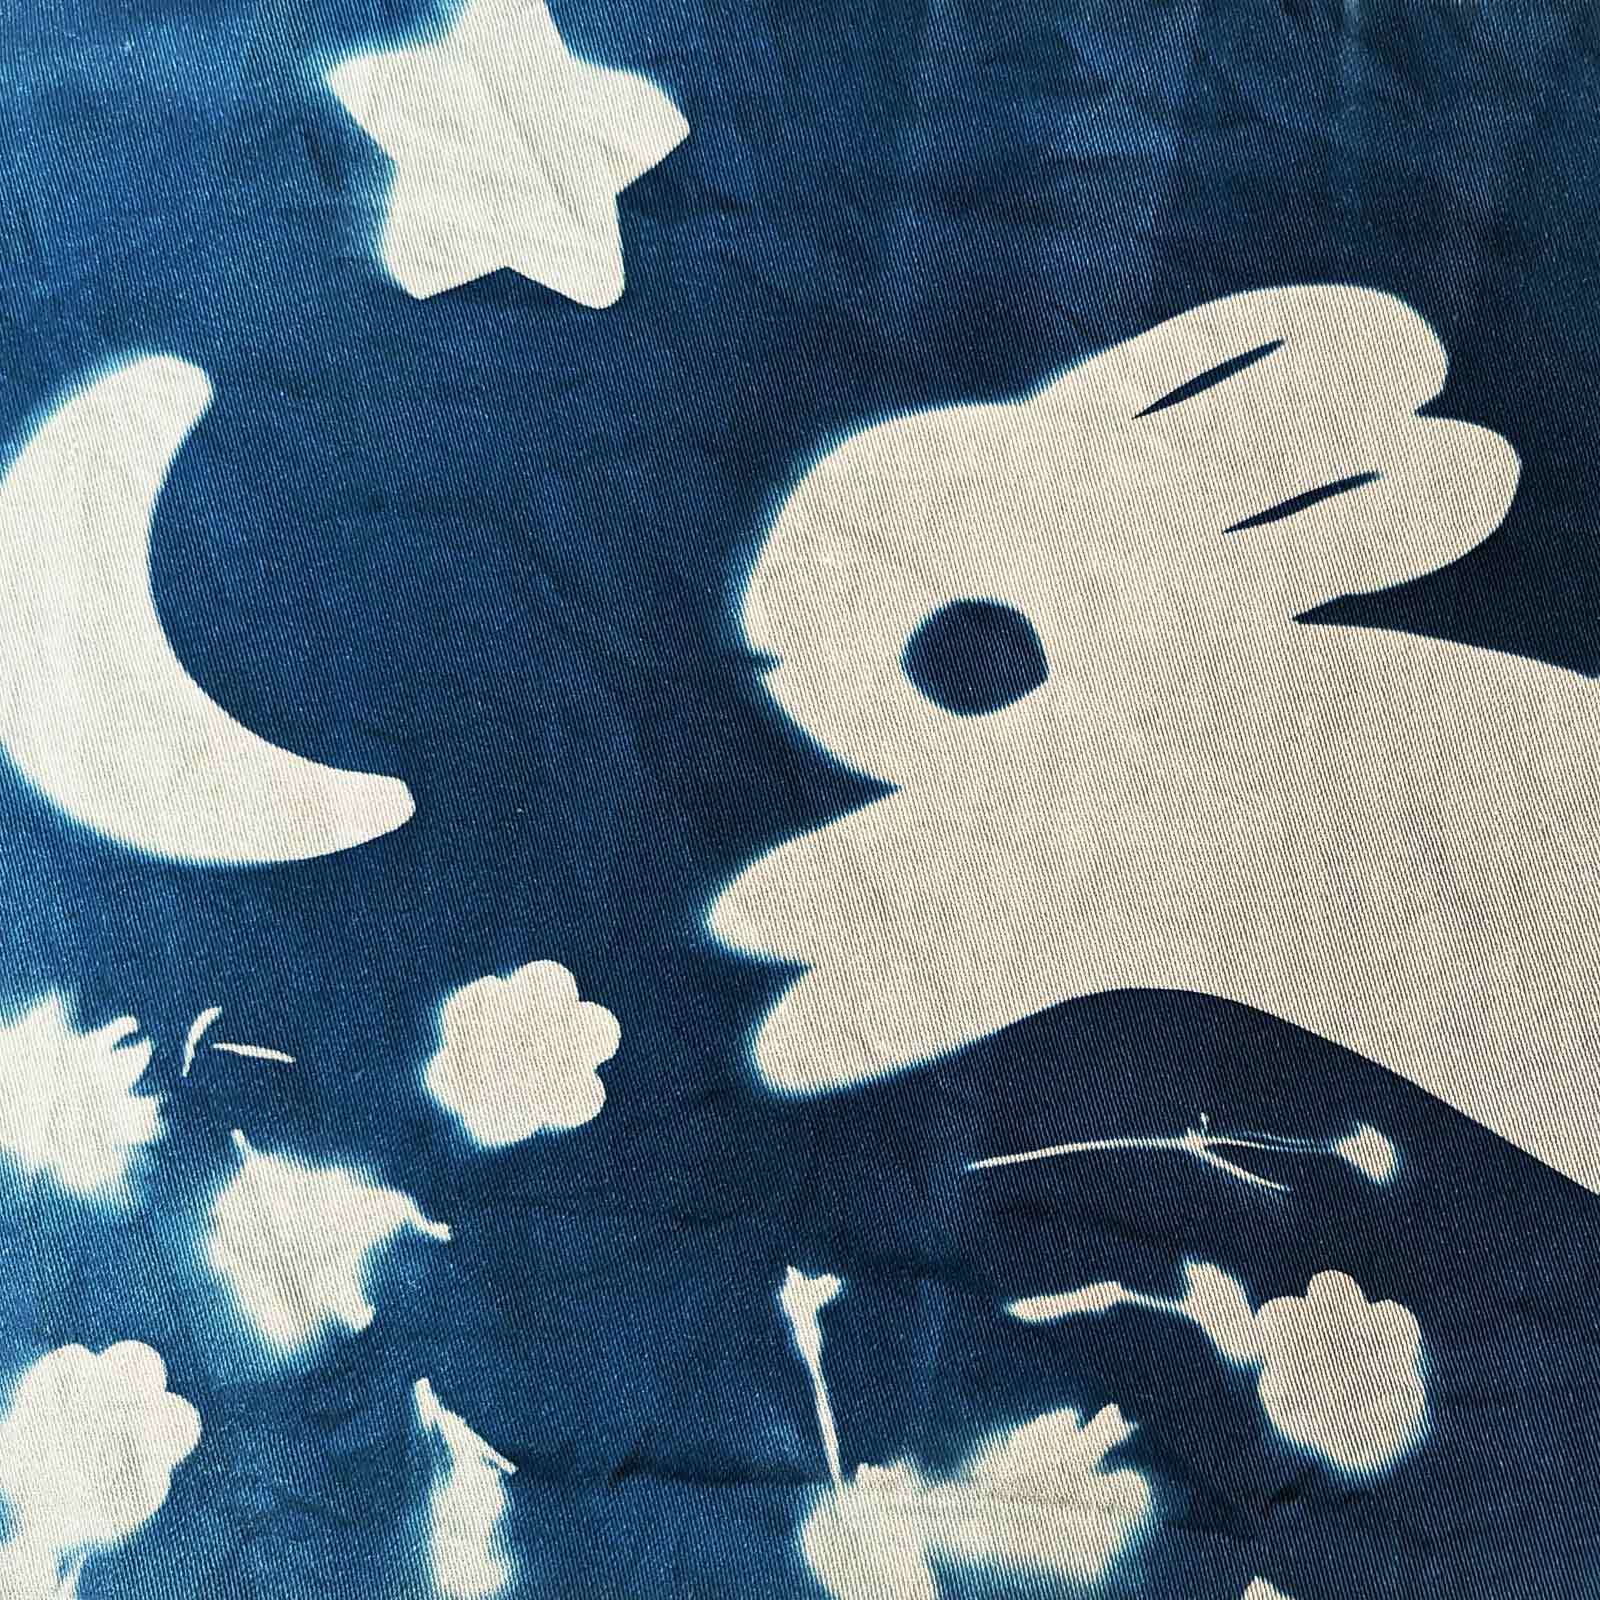 Get hold of our dreamy Cyanotype print, showcasing a fun-loving rabbit under a half-moon surrounded by stars. All beautifully laid out on a artistically textured blue backdrop.